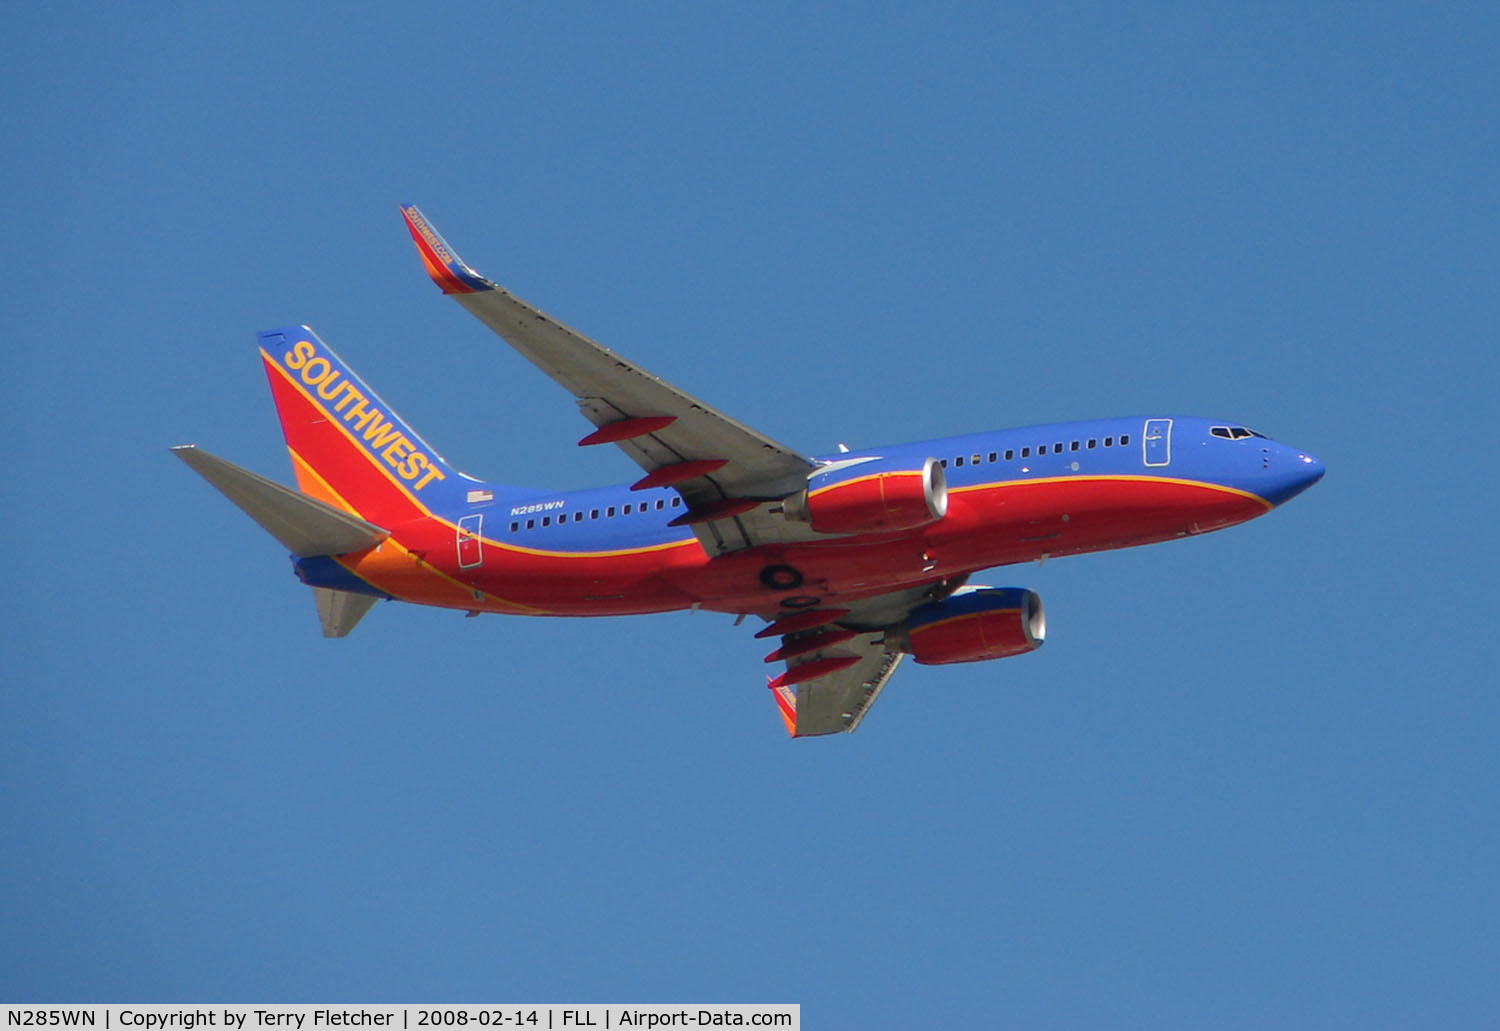 N285WN, 2007 Boeing 737-7H4 C/N 32536, Southwest B737 climbs away from Ft.Lauderdale Int